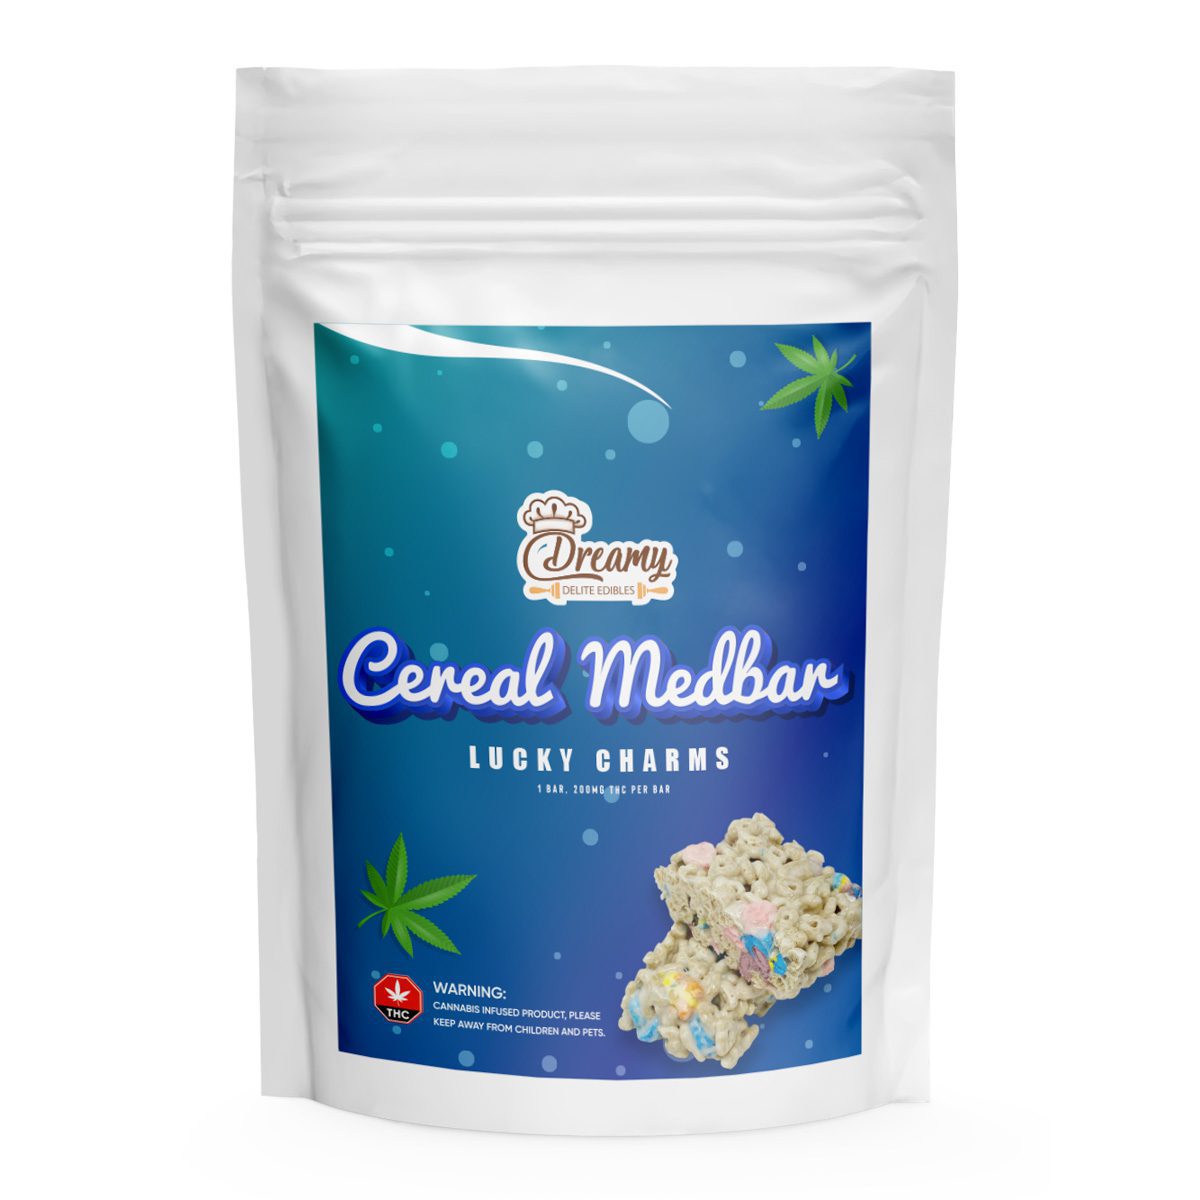 Lucky-Charms-Cereal-Medbar-200MG-THC-By-Dreamy-Delite-Edibles-front